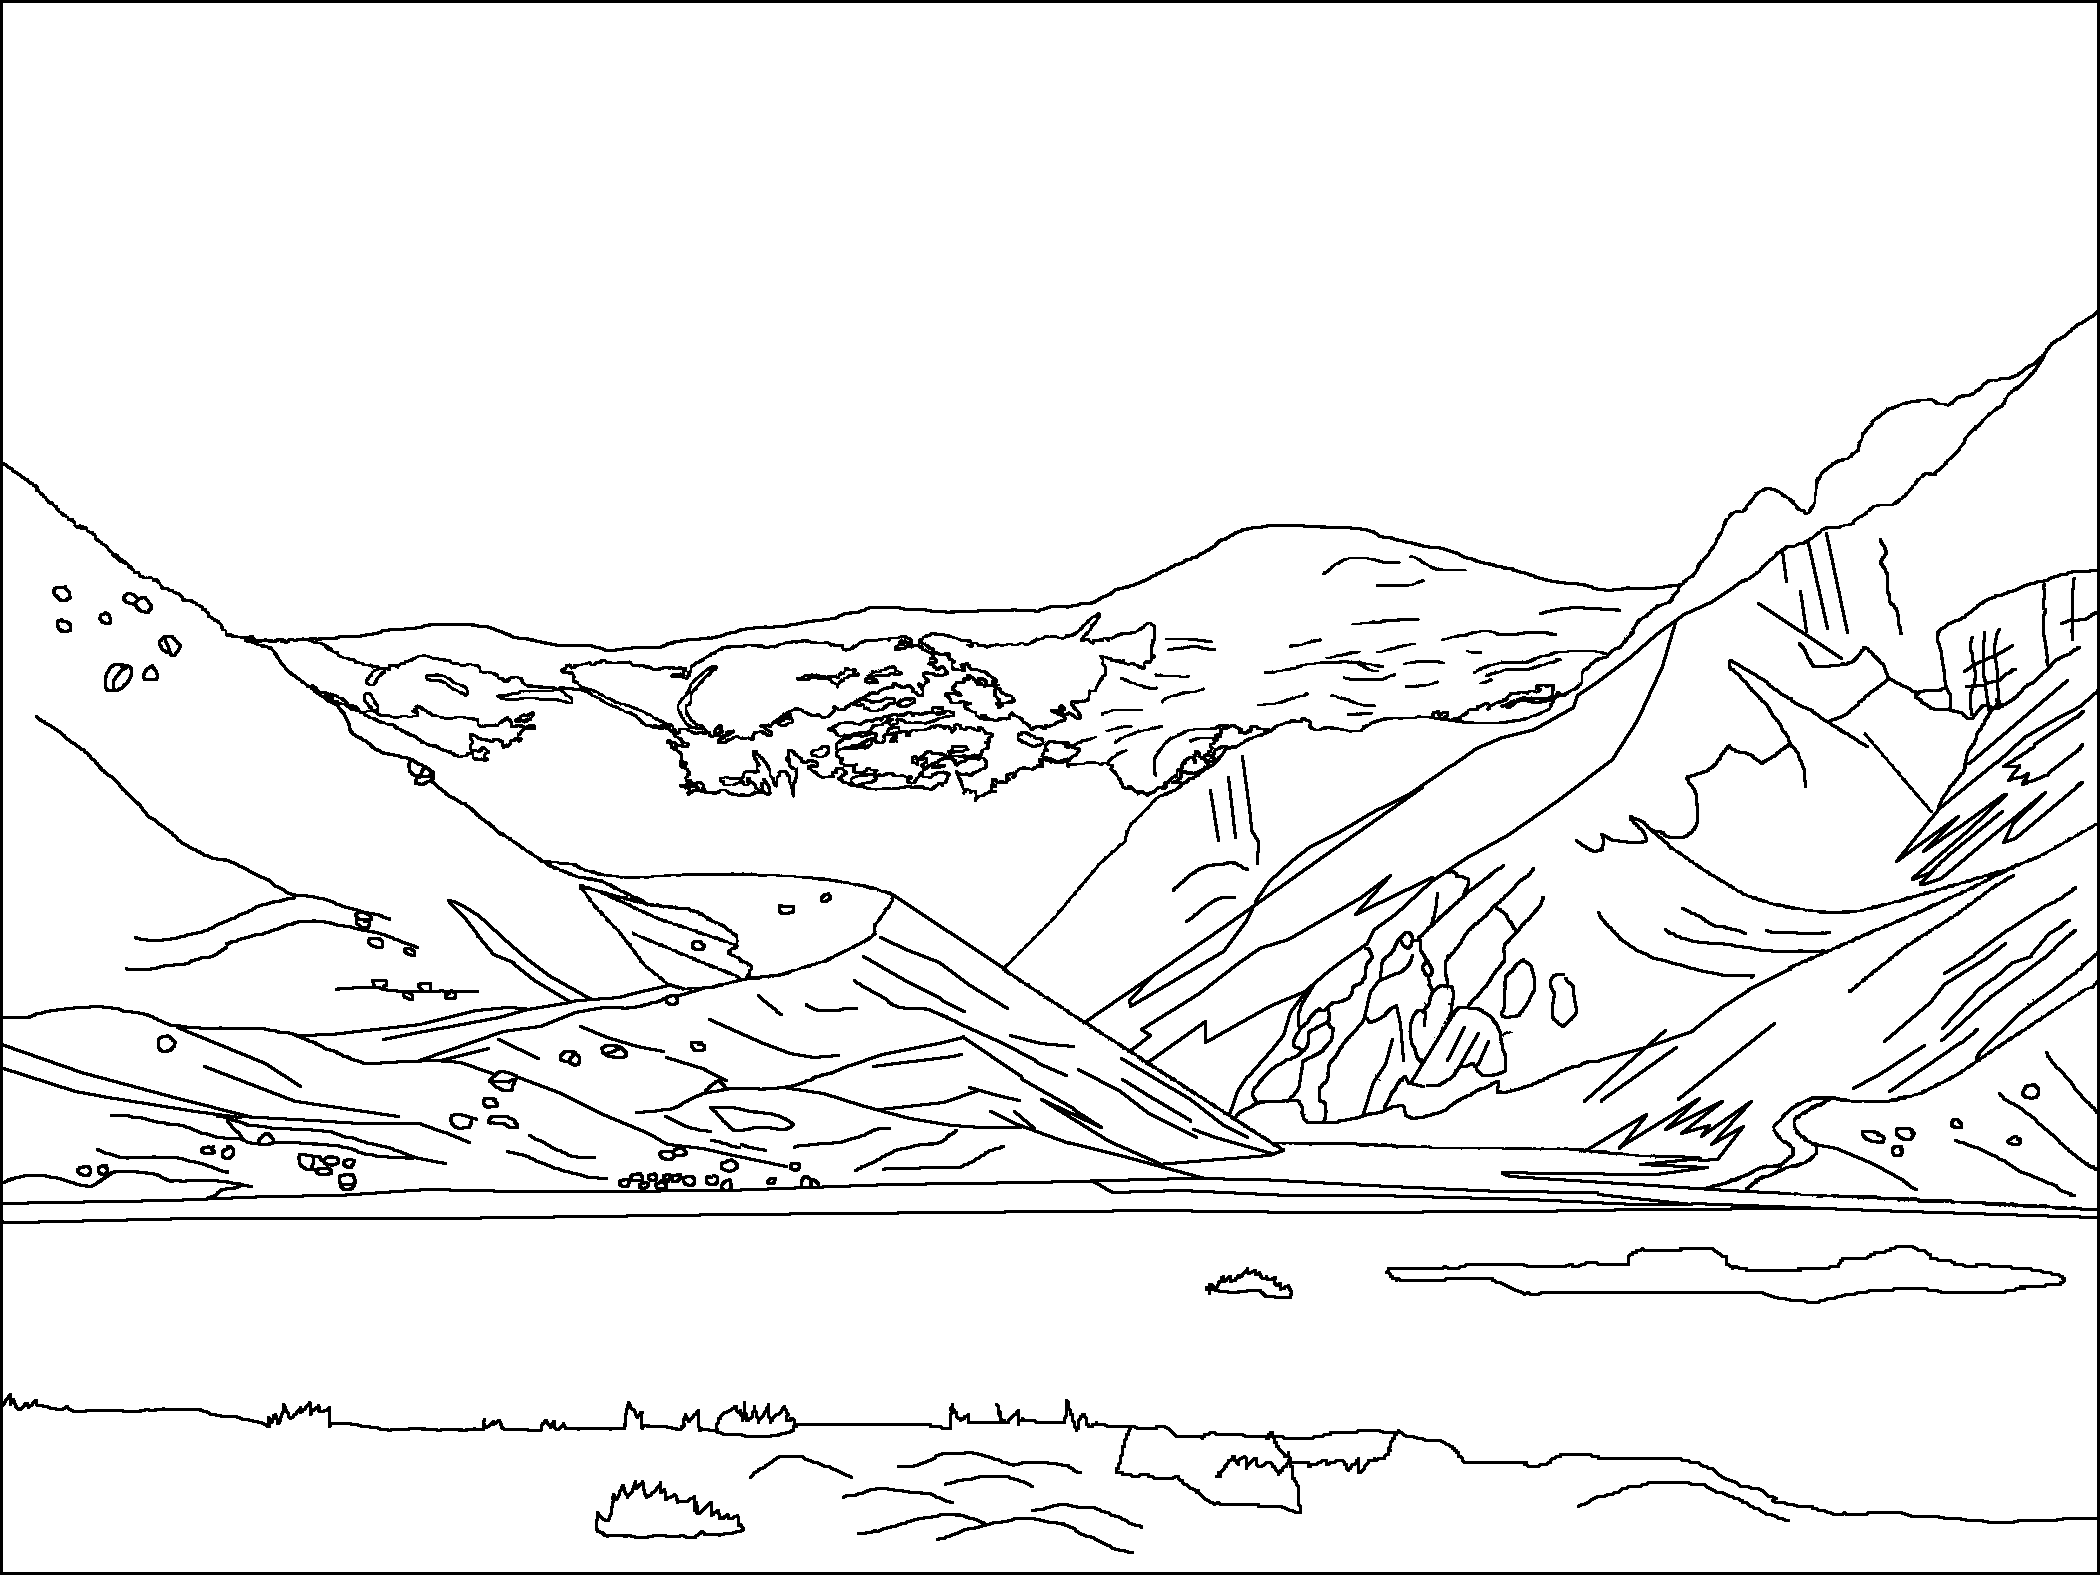 Mountain Coloring Page - Coloring Pages for Kids and for Adults